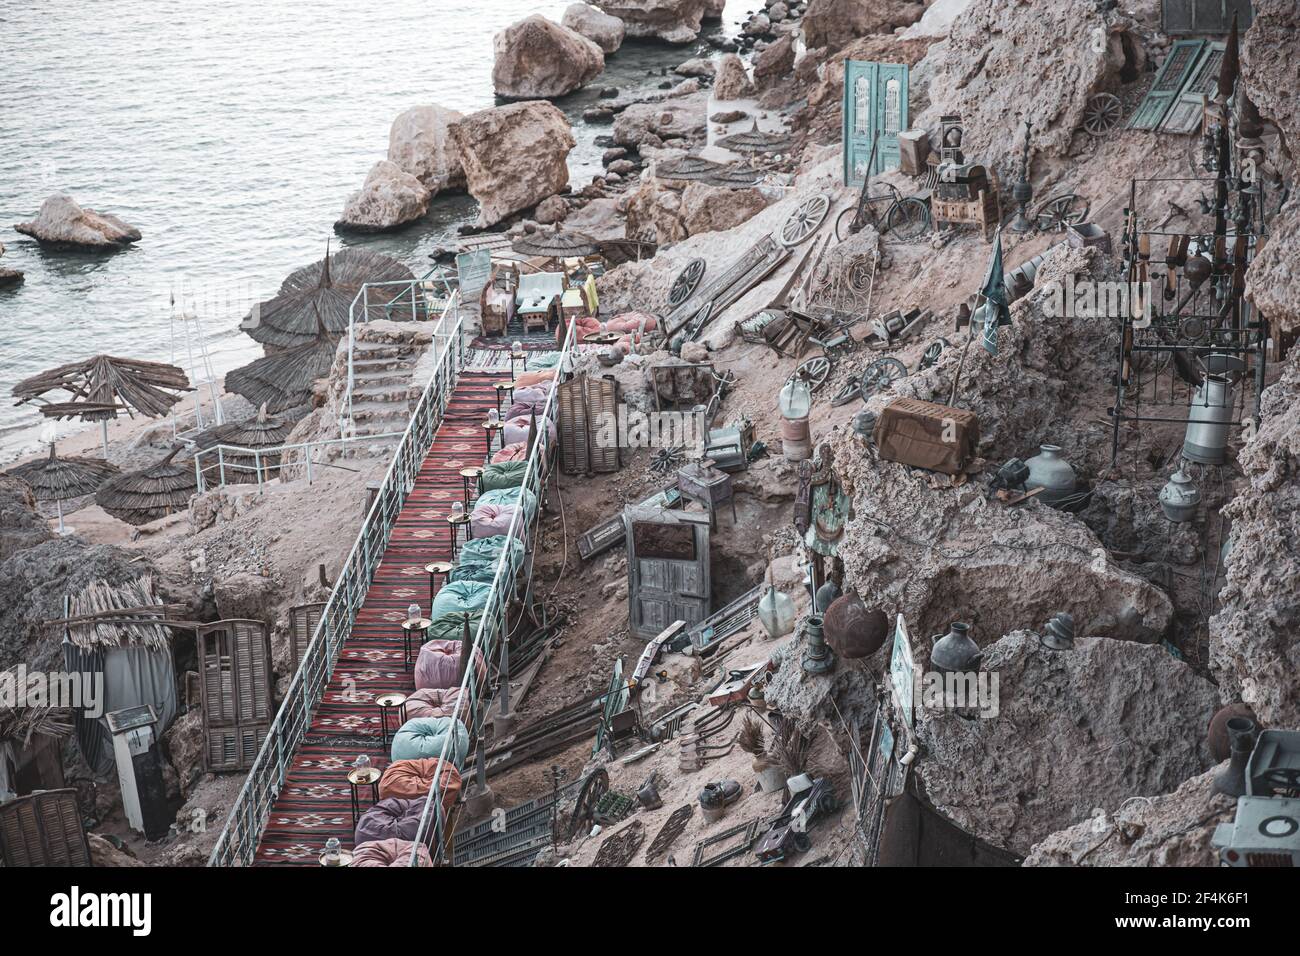 A colorful and authentic place with many antiques and an oriental atmosphere near a cliff by the sea. Stock Photo